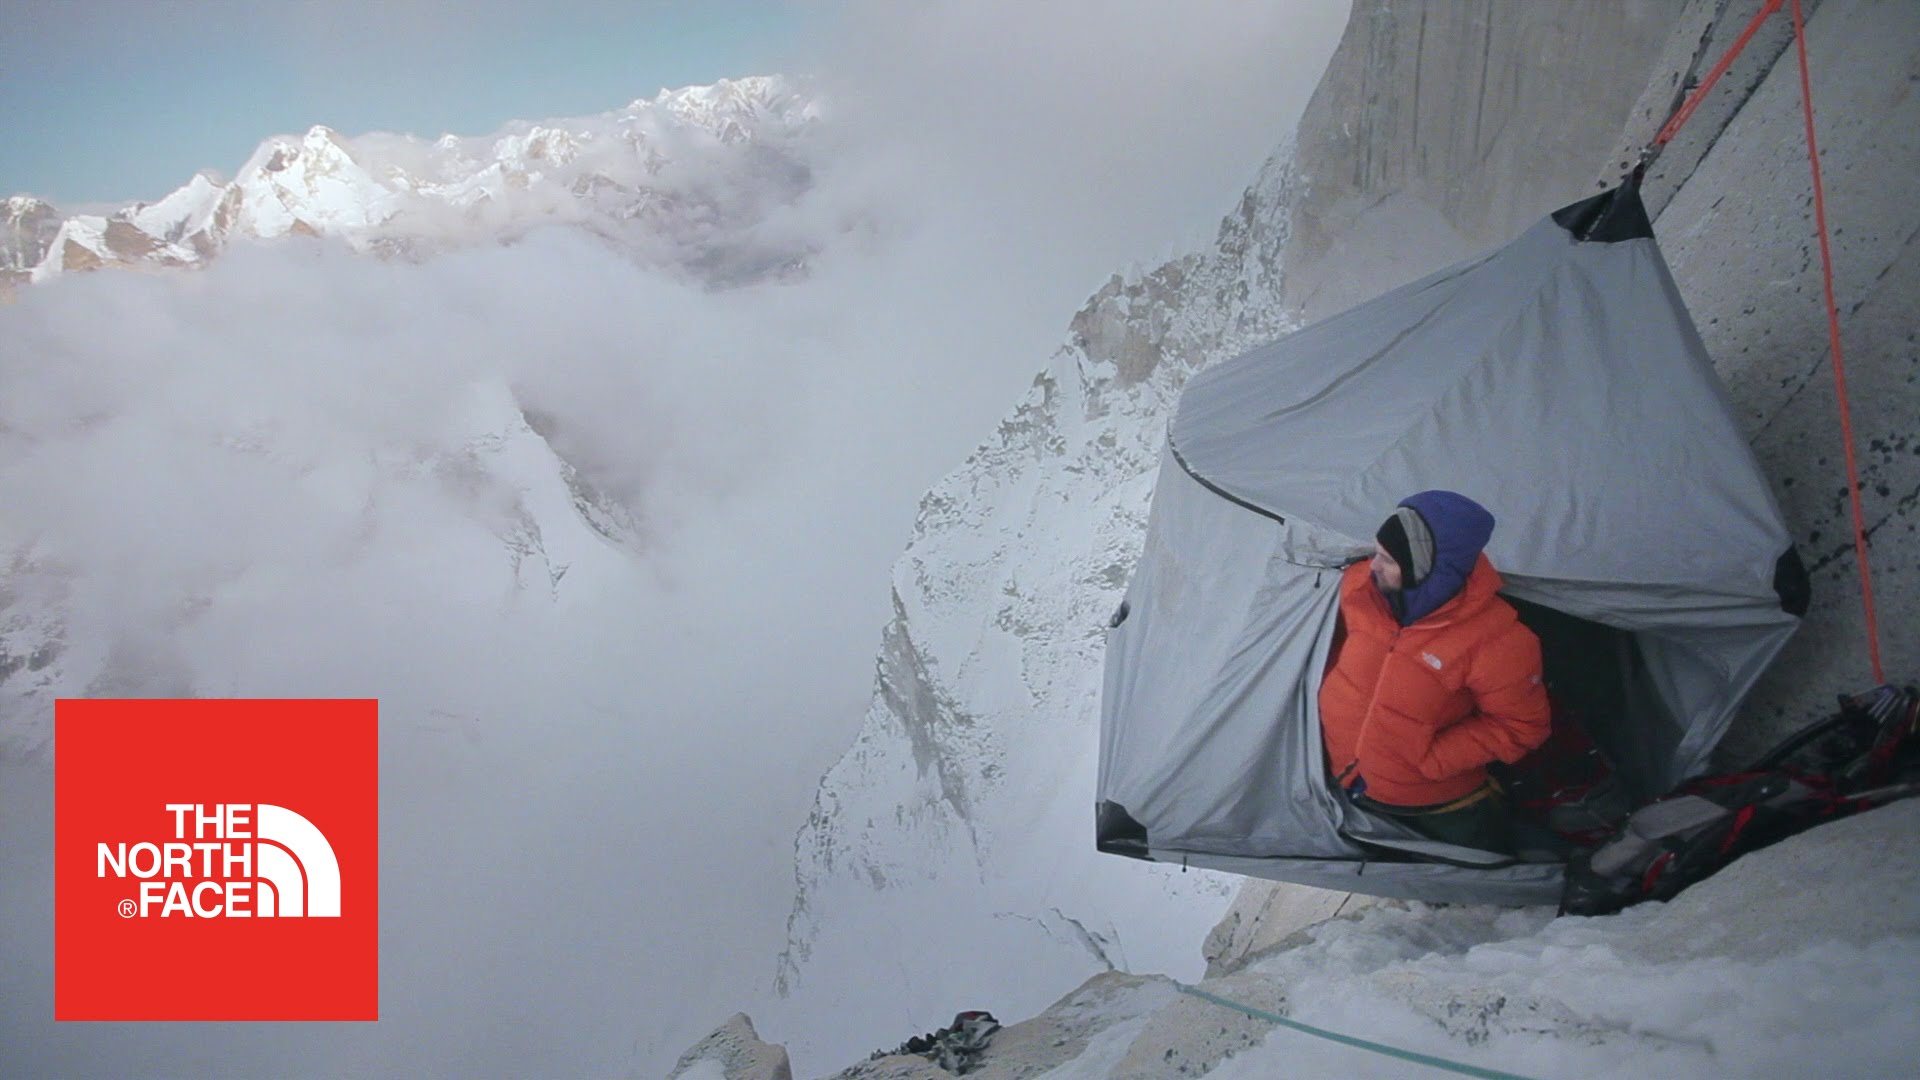 The North Face Film Advert By Your Land Ads Of World